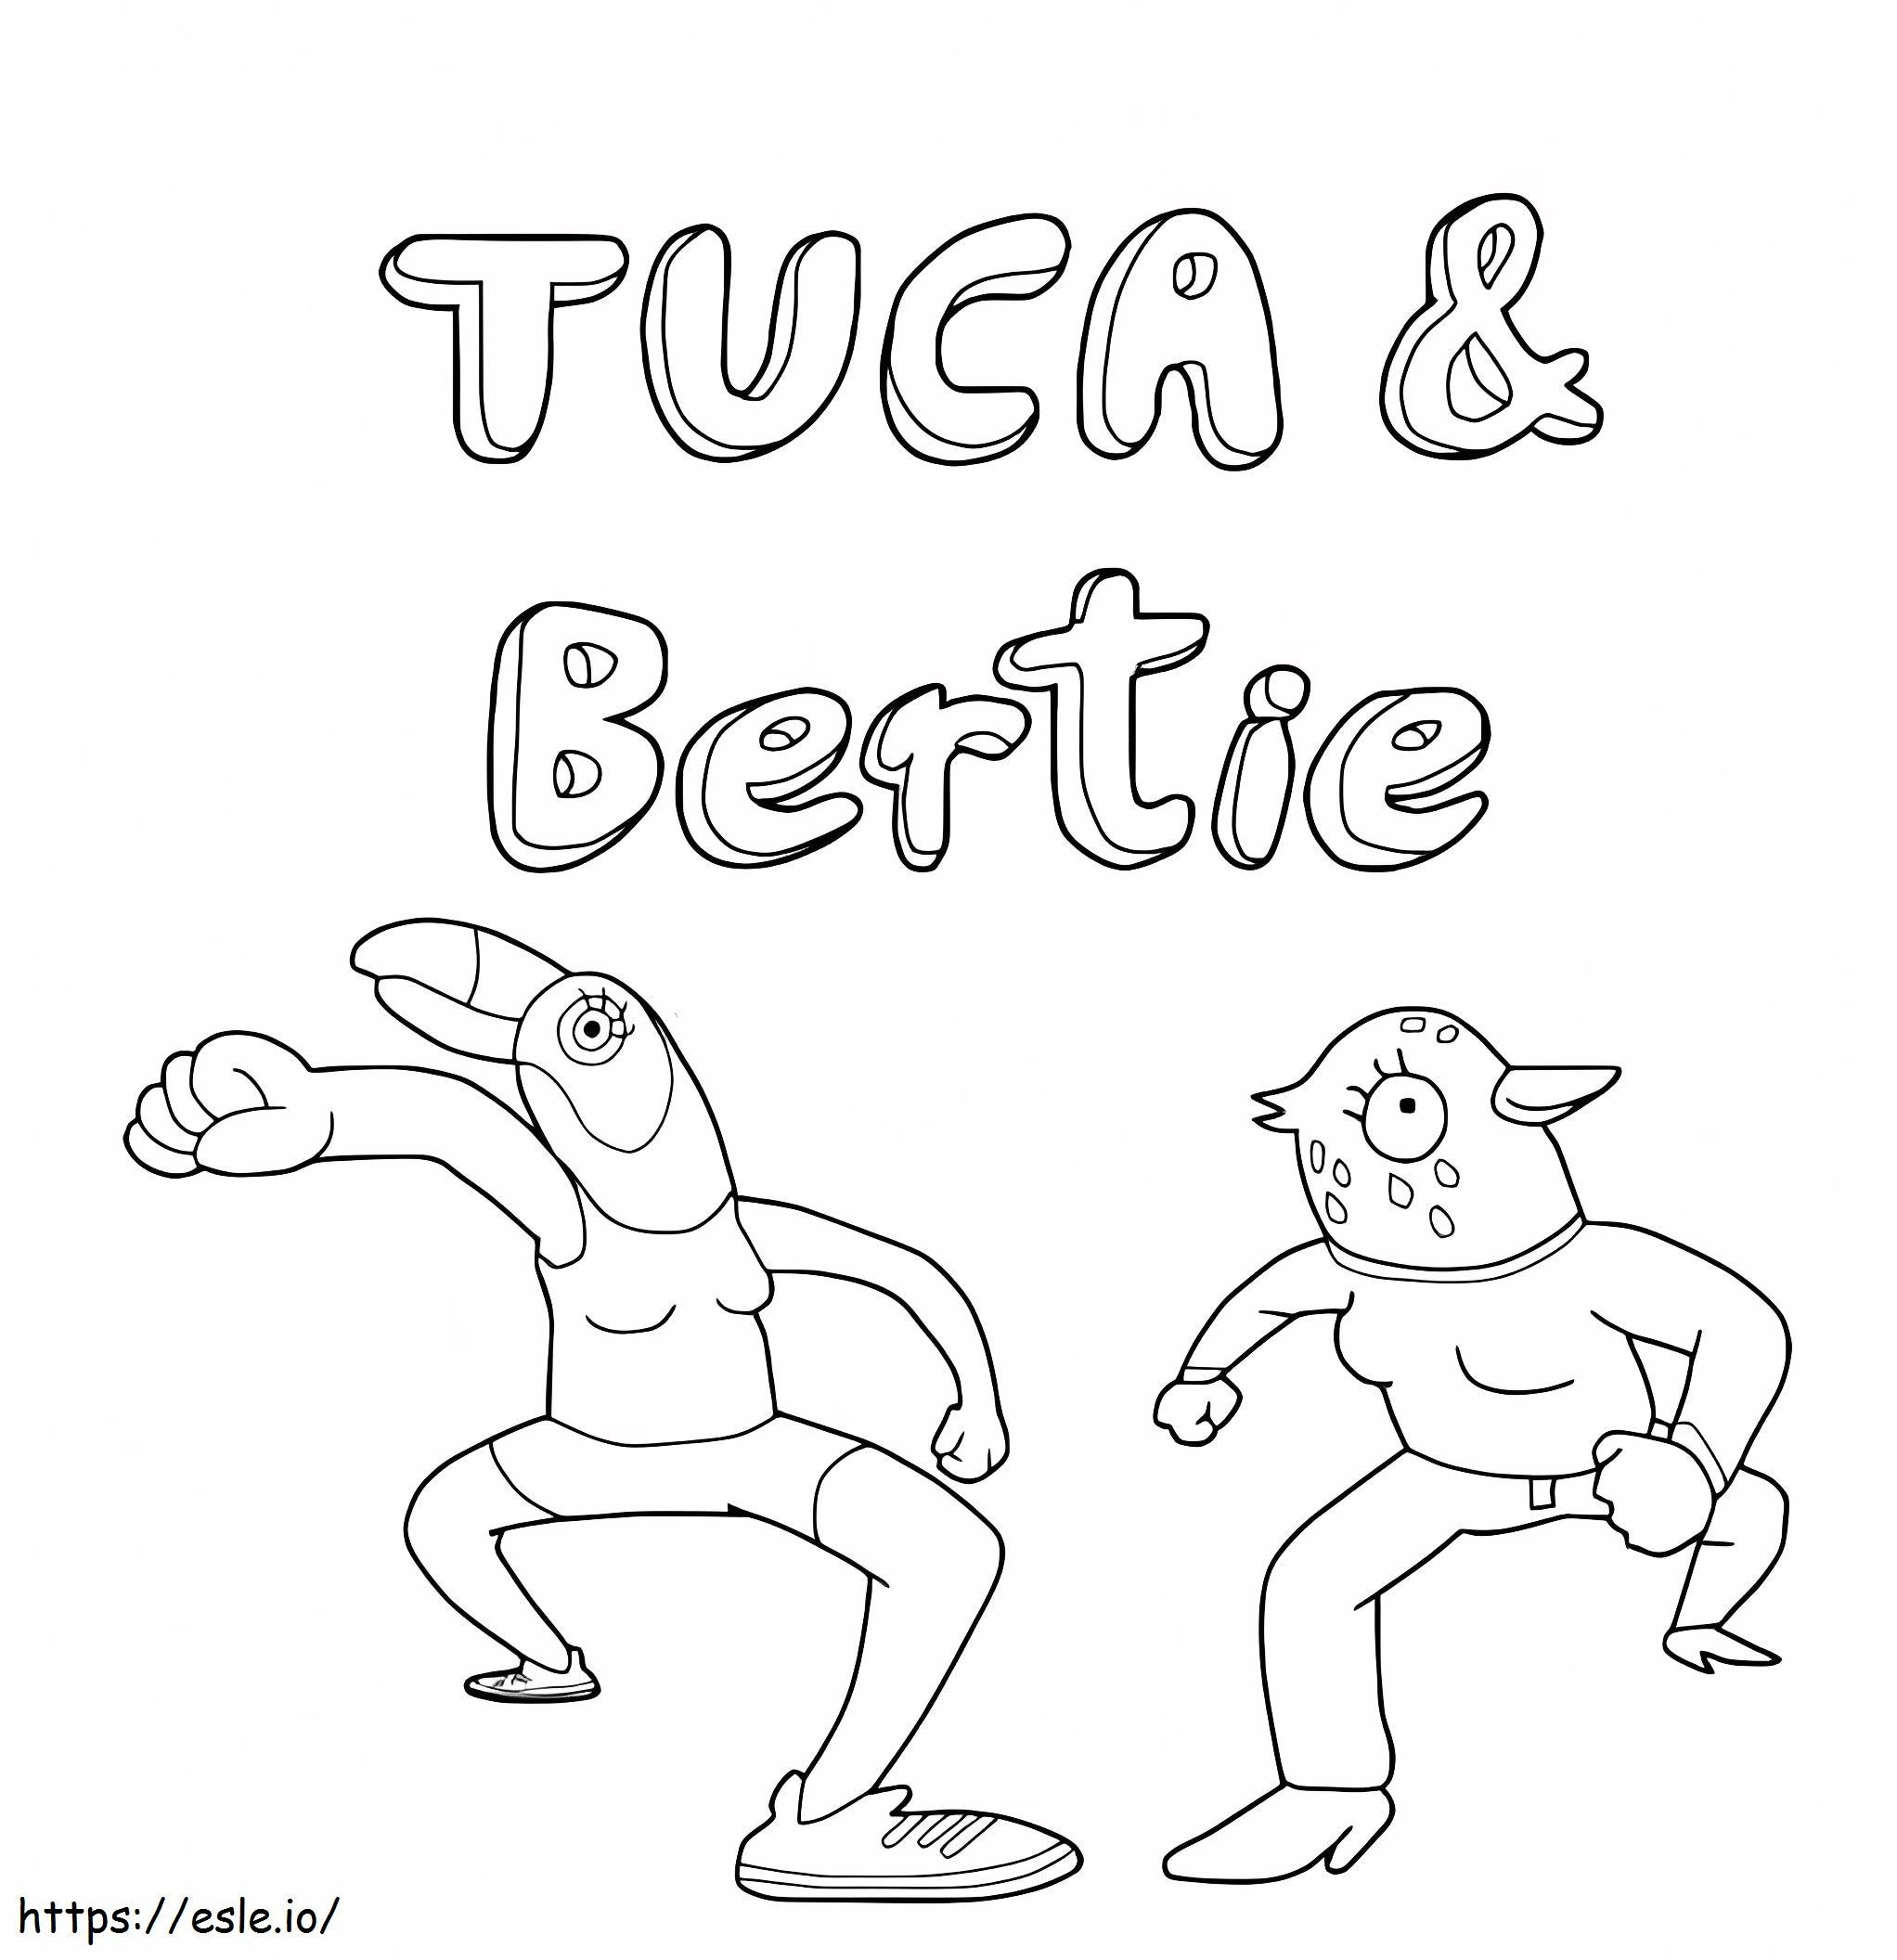 Funny Tuca And Bertie coloring page